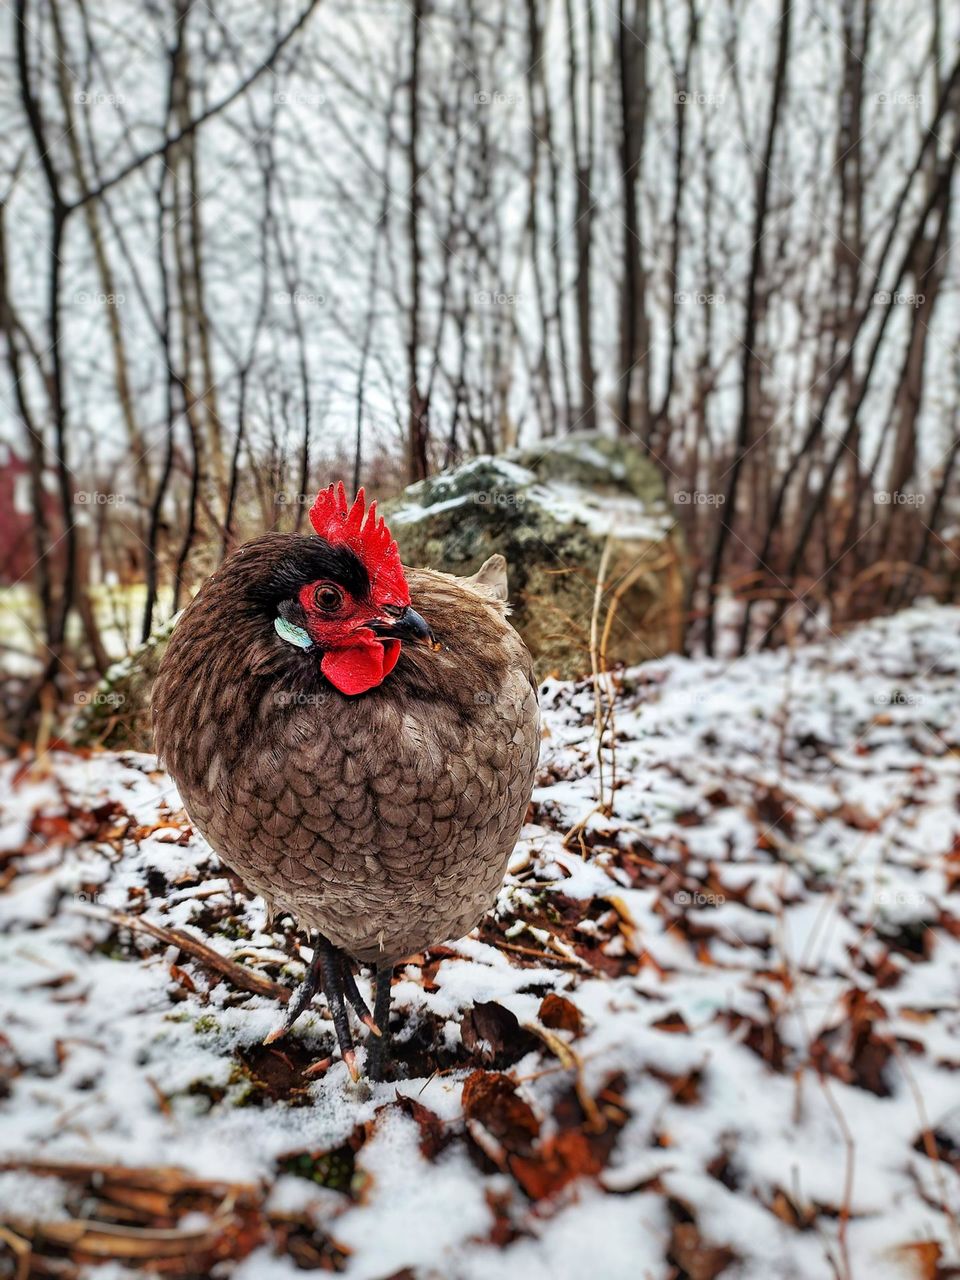 Chicken foraging in the snow.